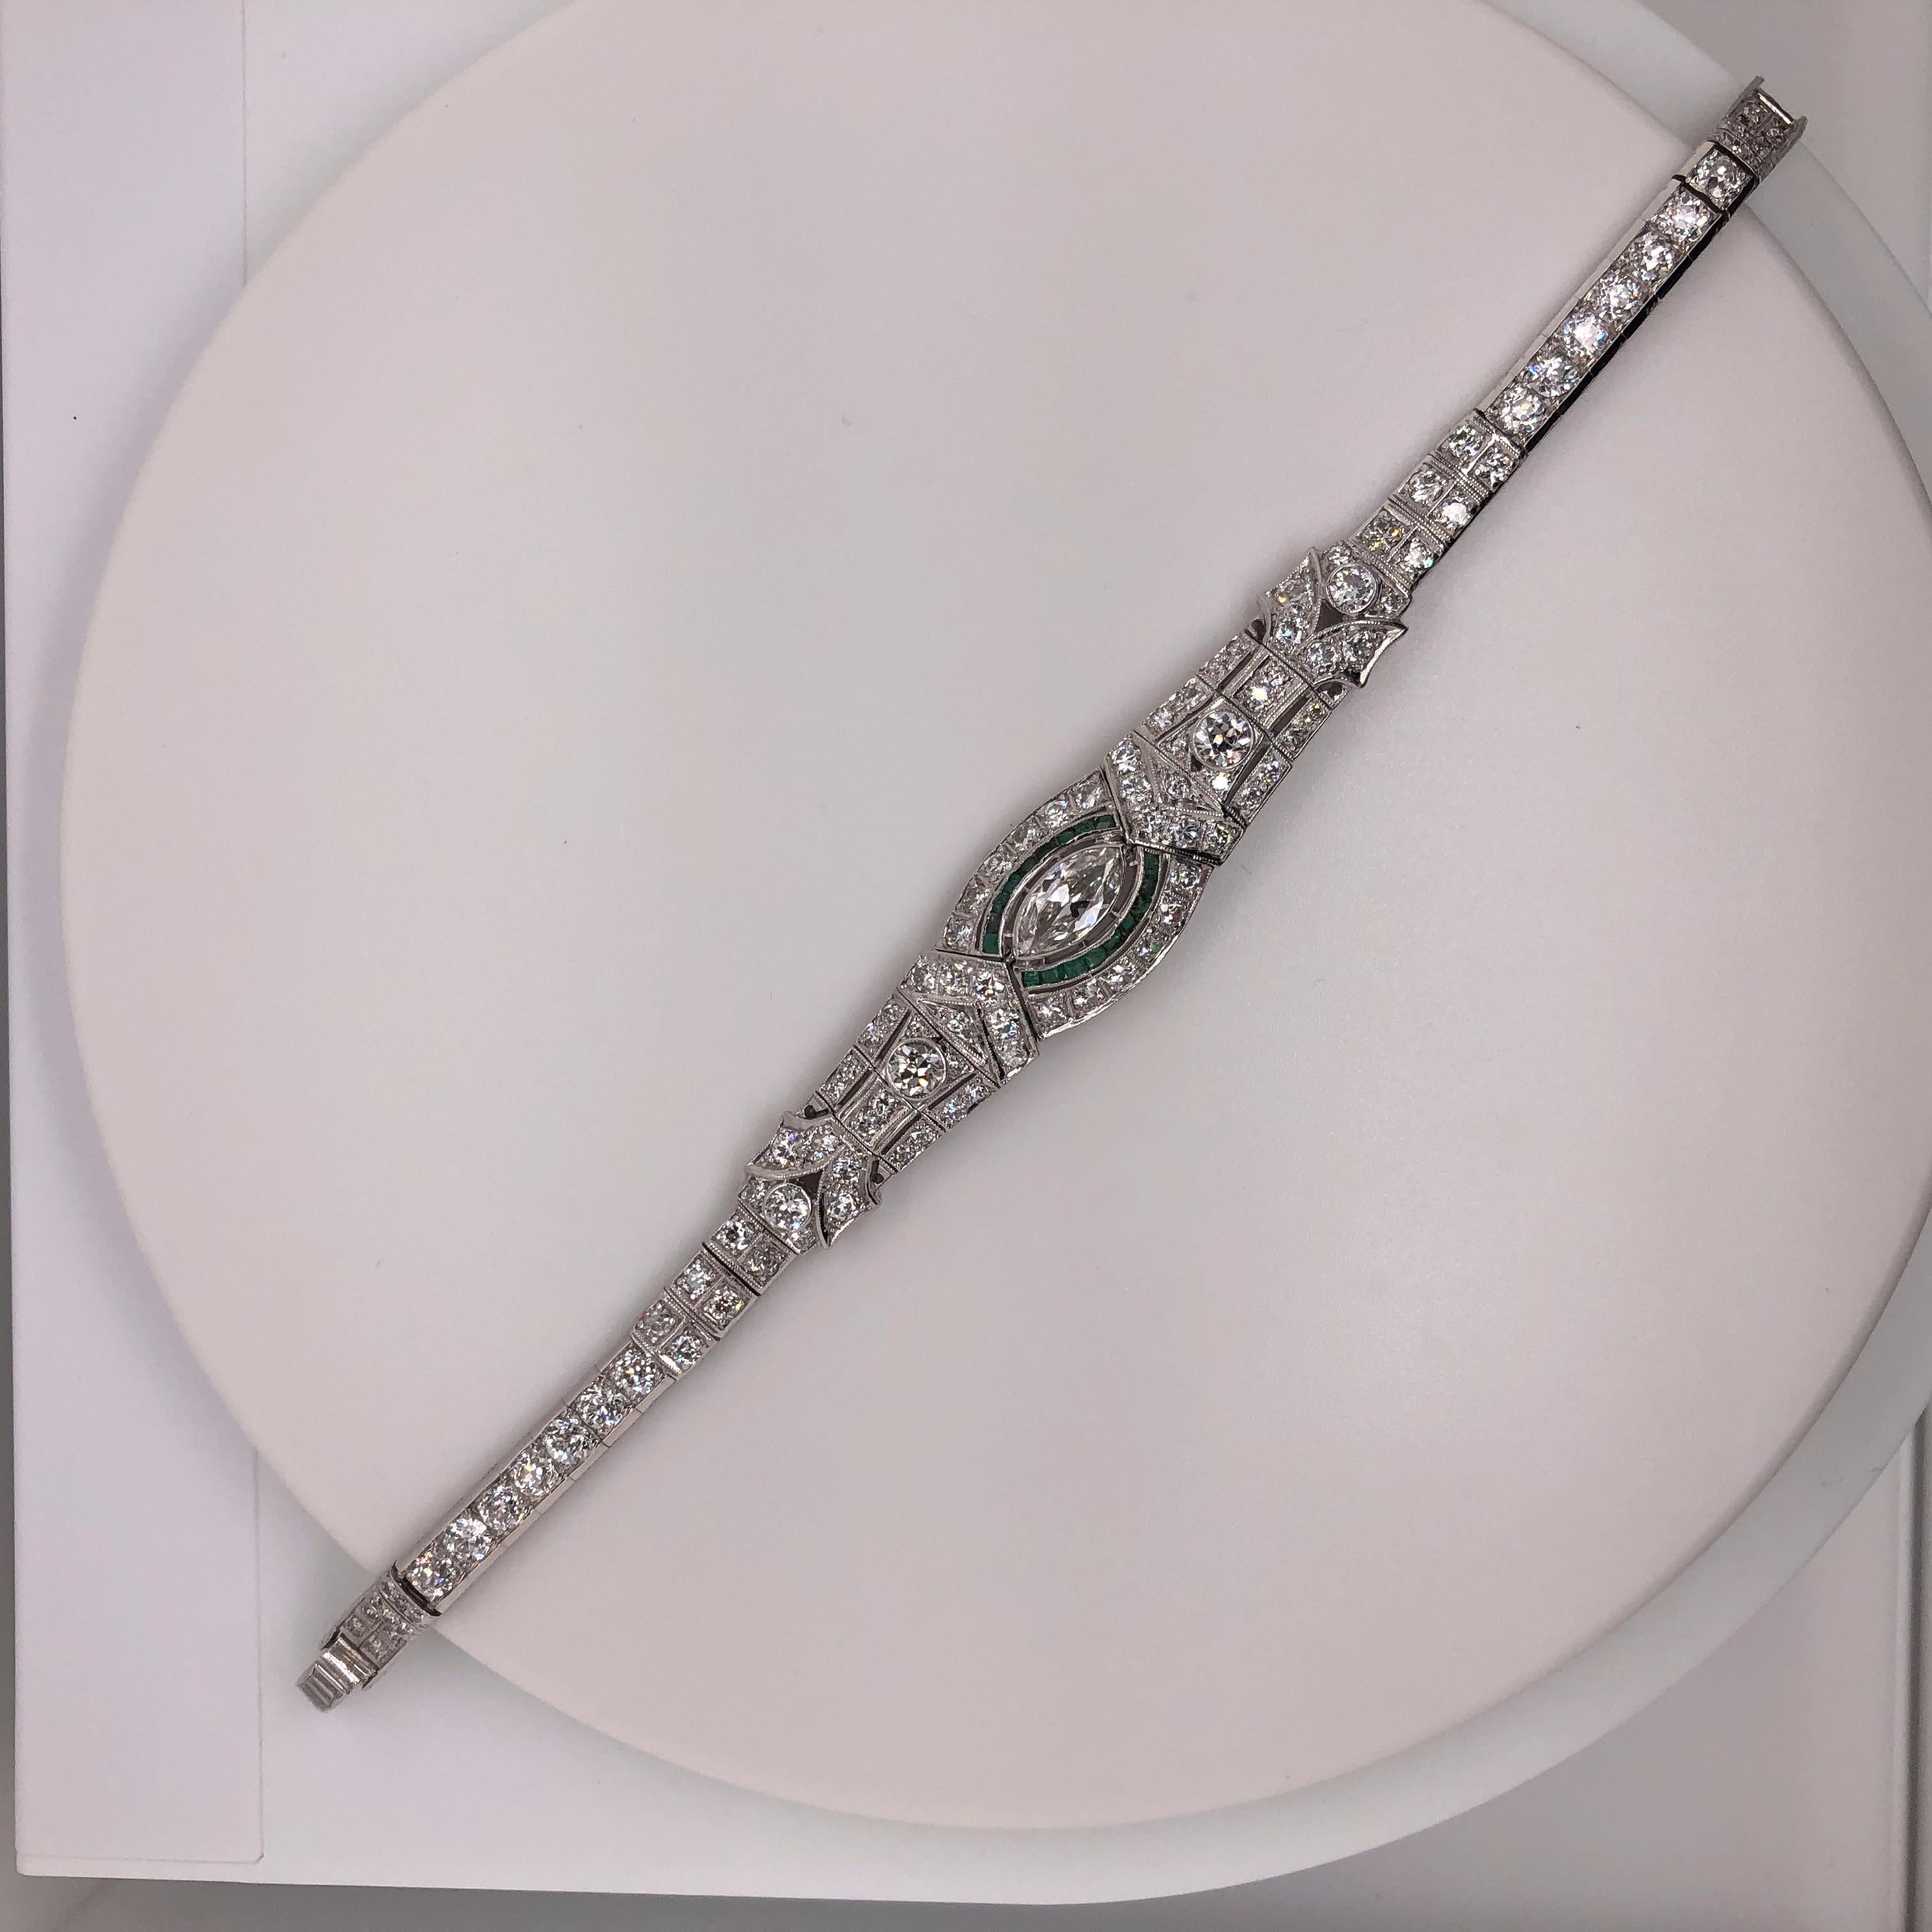 Original Art Deco bracelet containing approximately 5.75 total carats of Old European Cut, Old Mine Cut, Single Cut and baguette cut diamonds. The bracelet is accented with French cut emeralds surrounding the center marquise cut diamond. The center